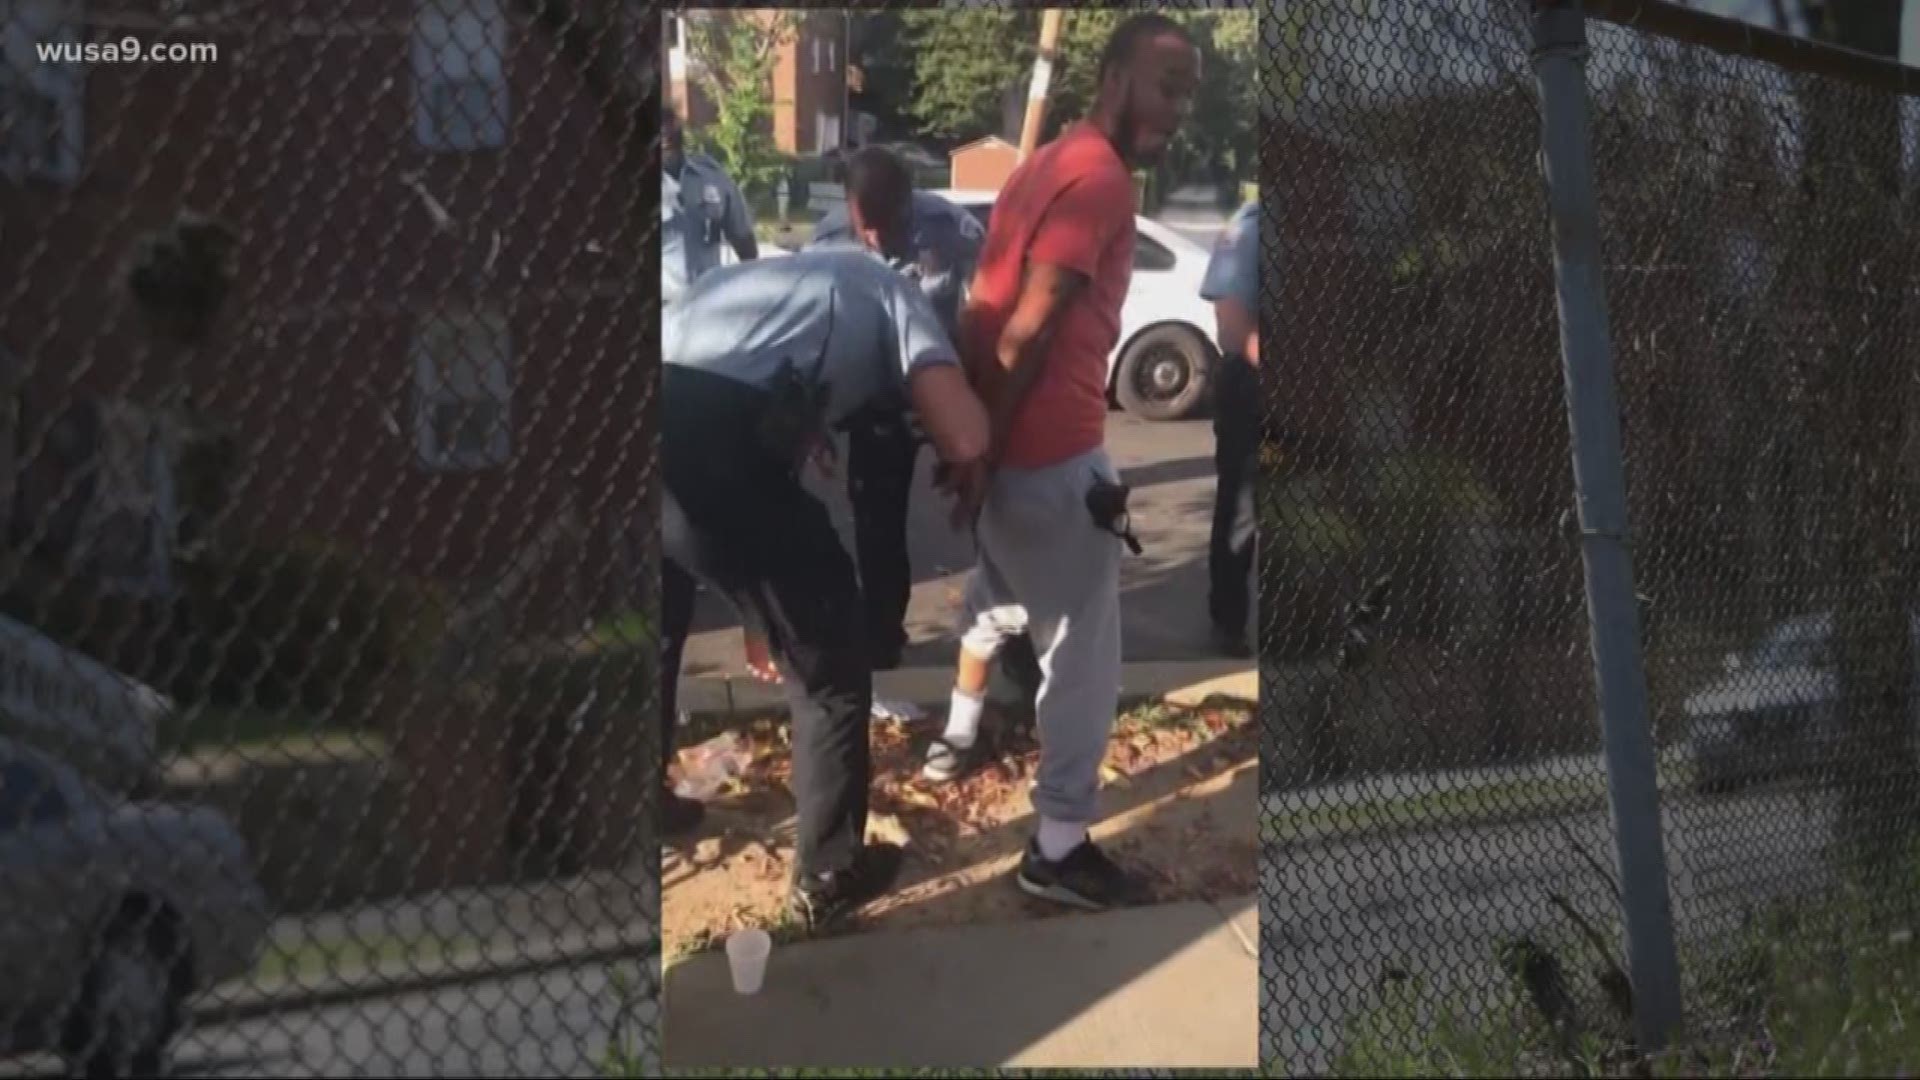 In the video, M.B. Cottingham can be seen protesting what appears to be an invasive body search by Officer Sean Lojacono. Now, he's filed a lawsuit.